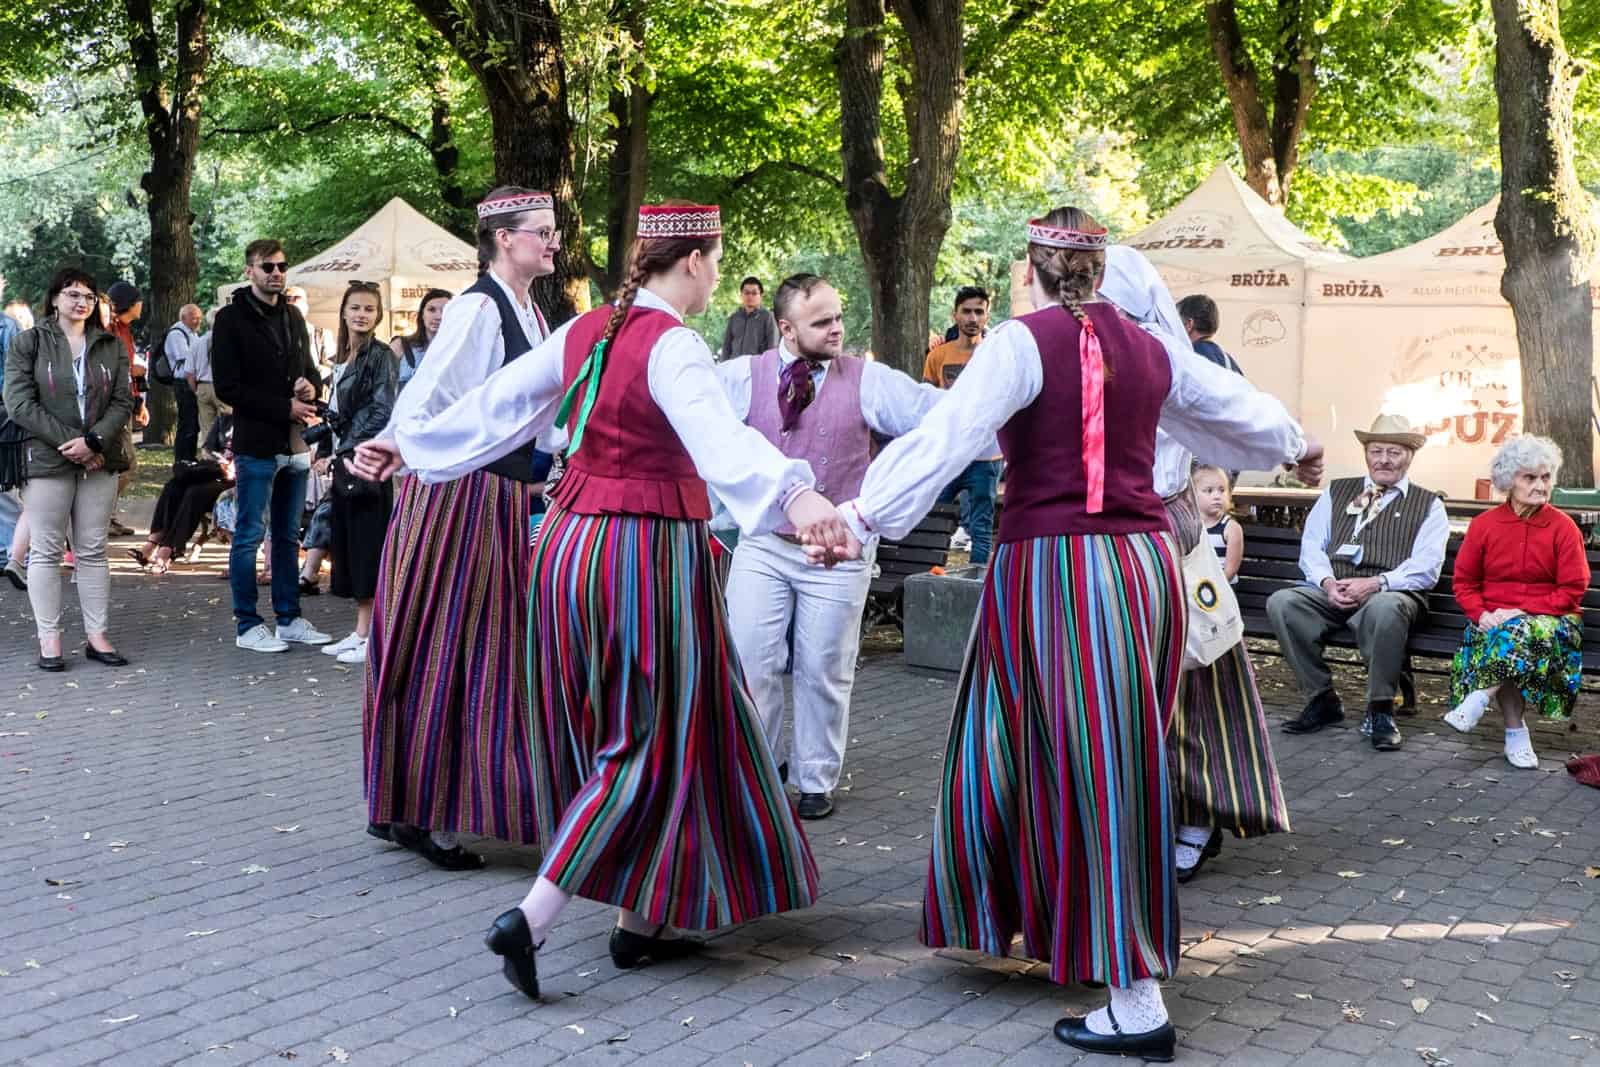 Latvian people dancing in the park during a performance at the Song and Dance Celebration in Riga